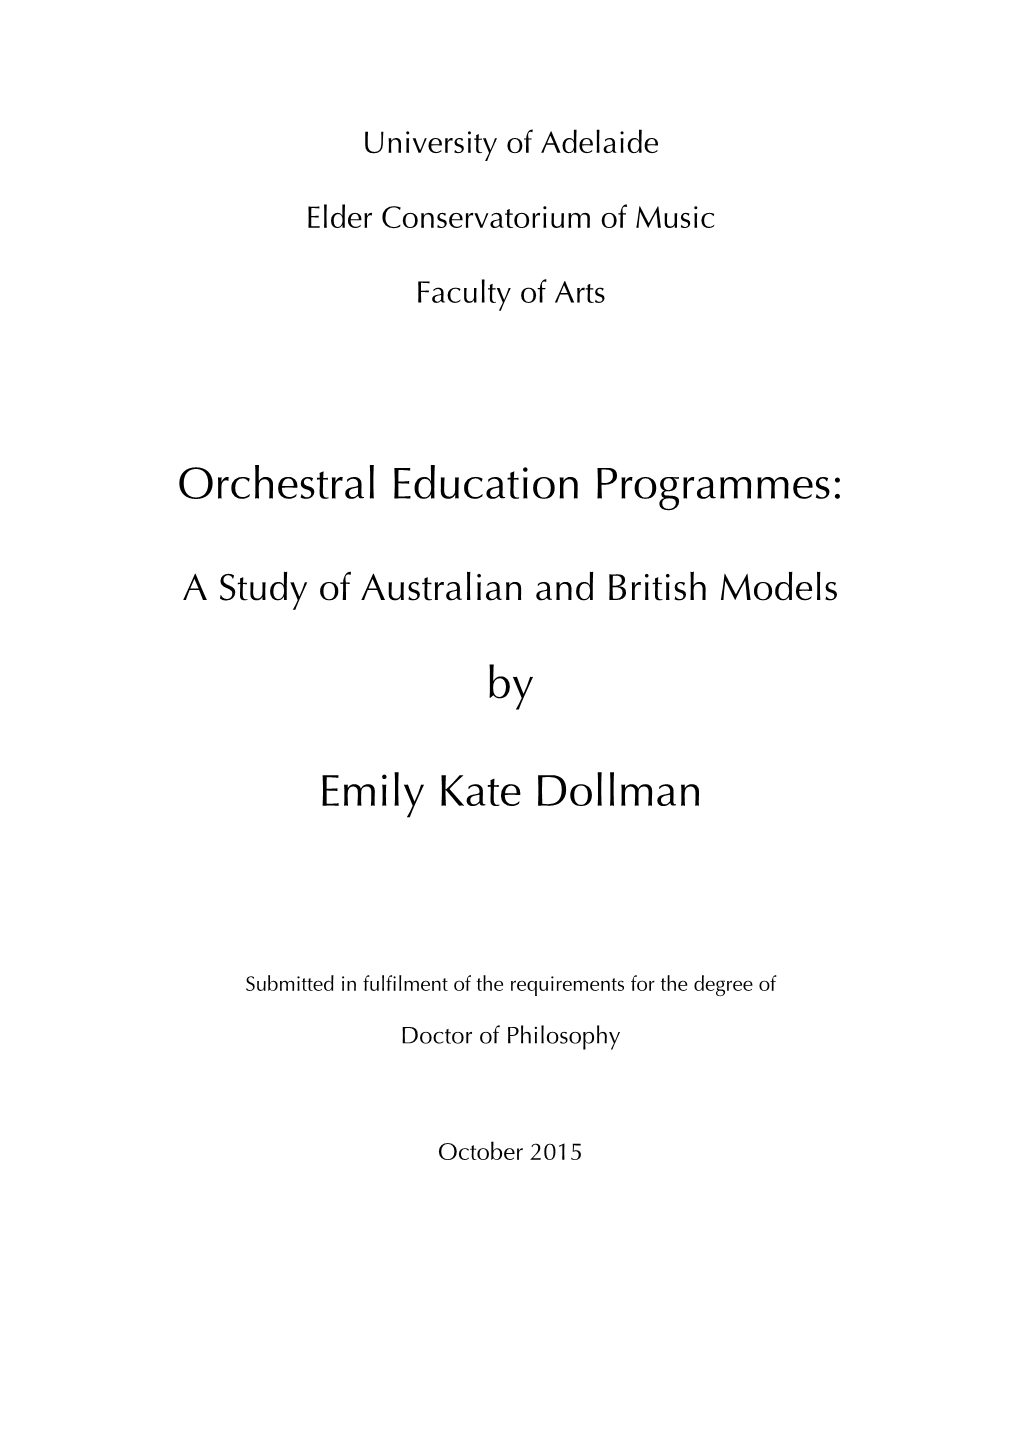 Orchestral Education Programmes